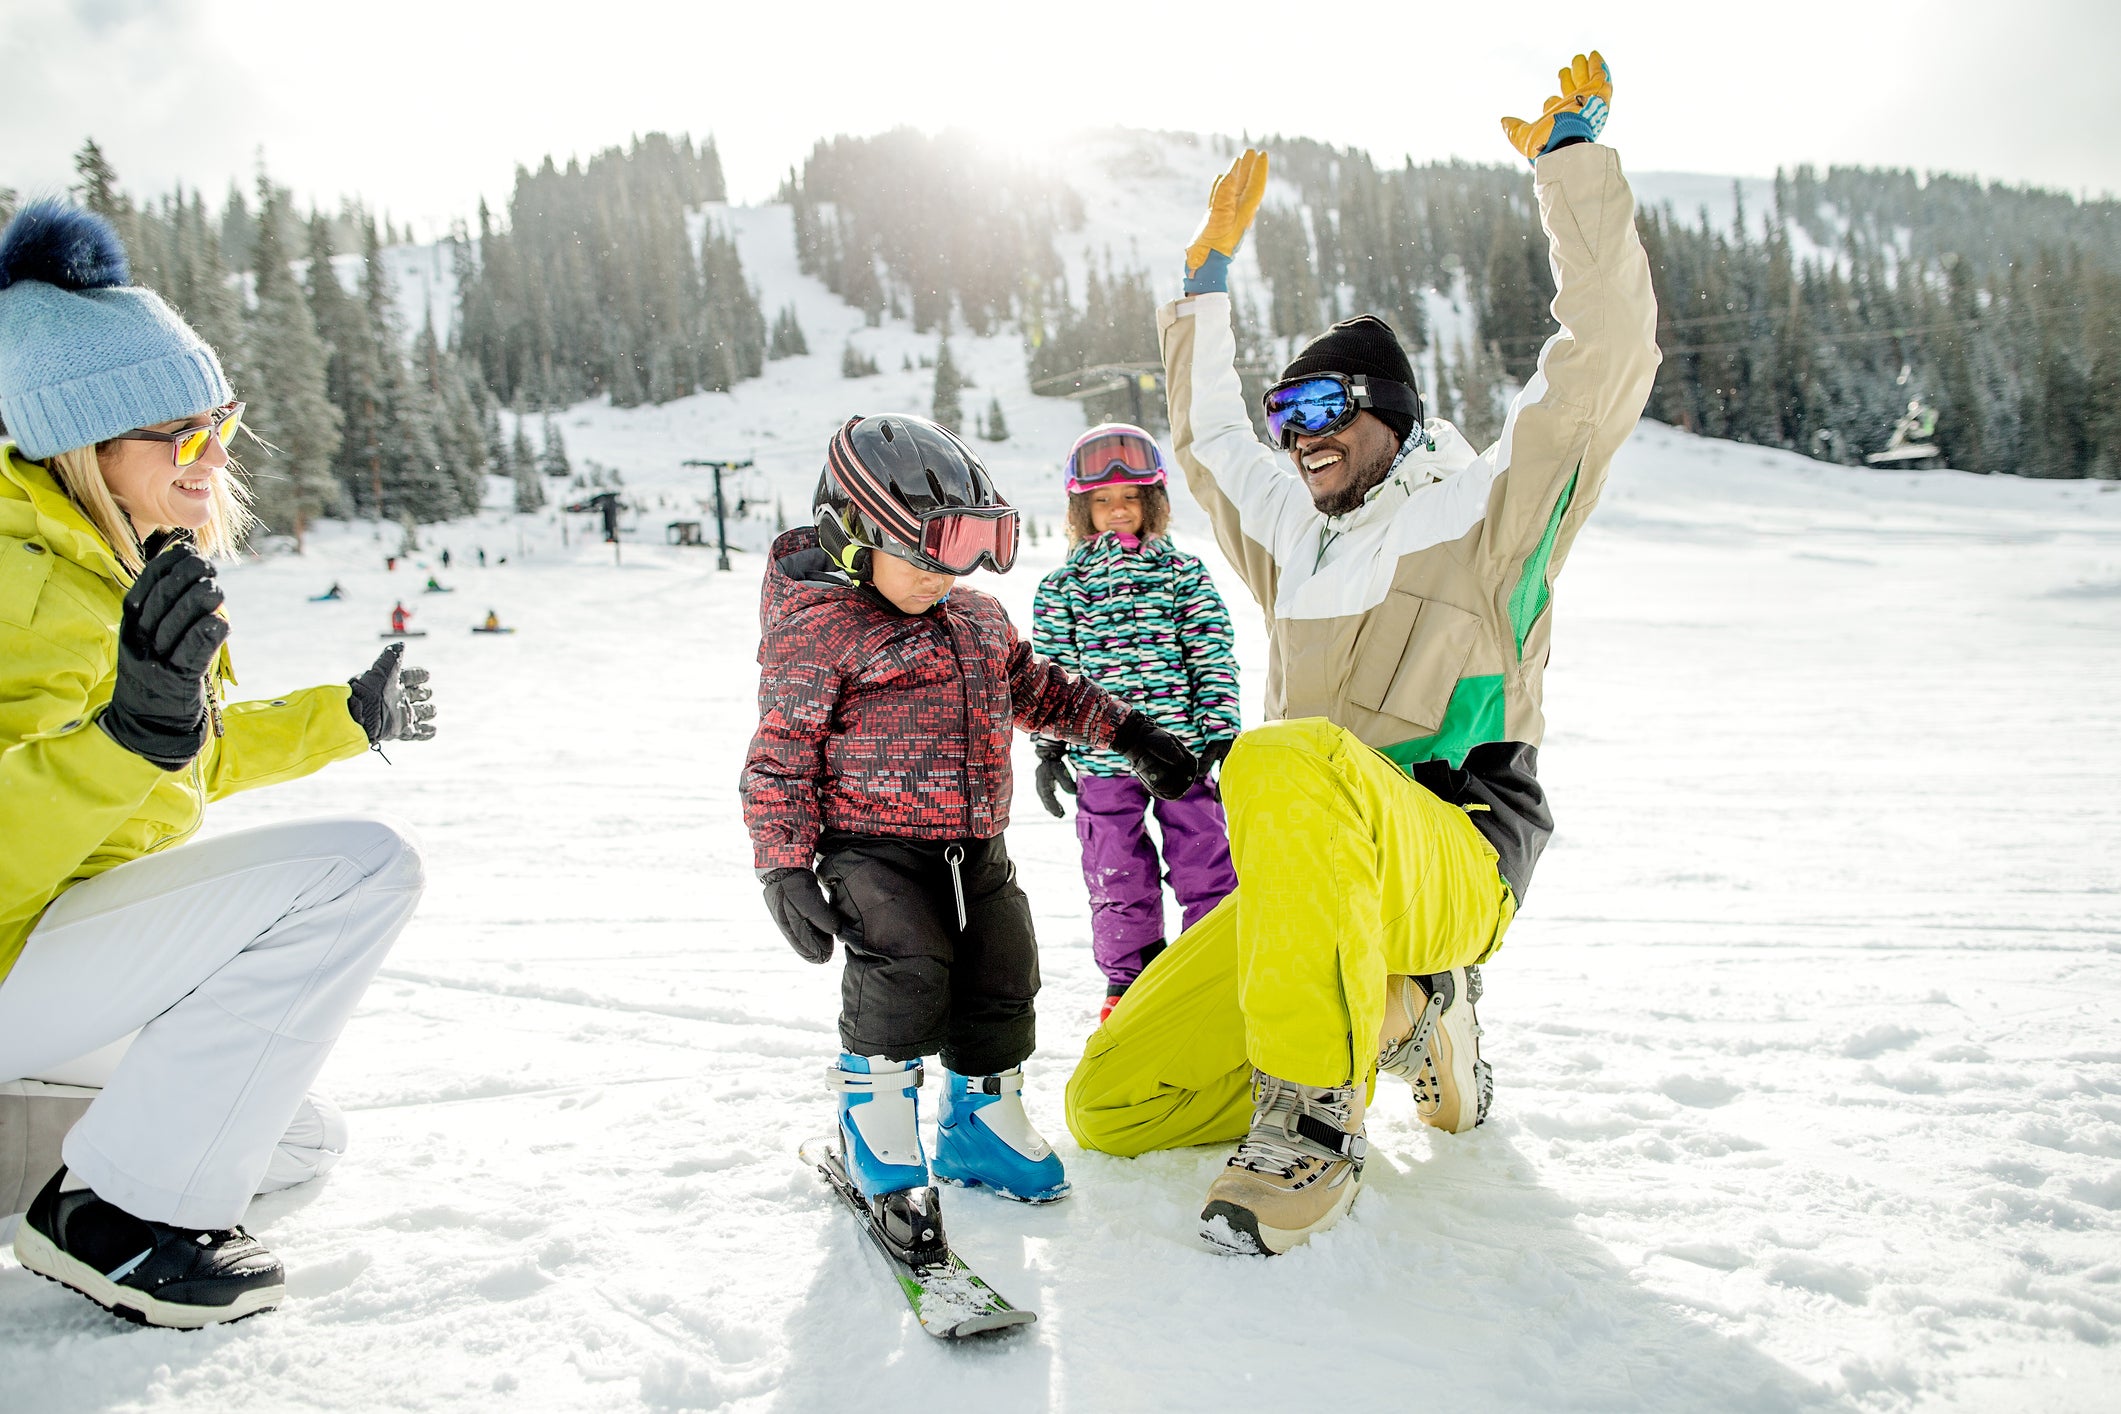 Best ski resorts for families in North America